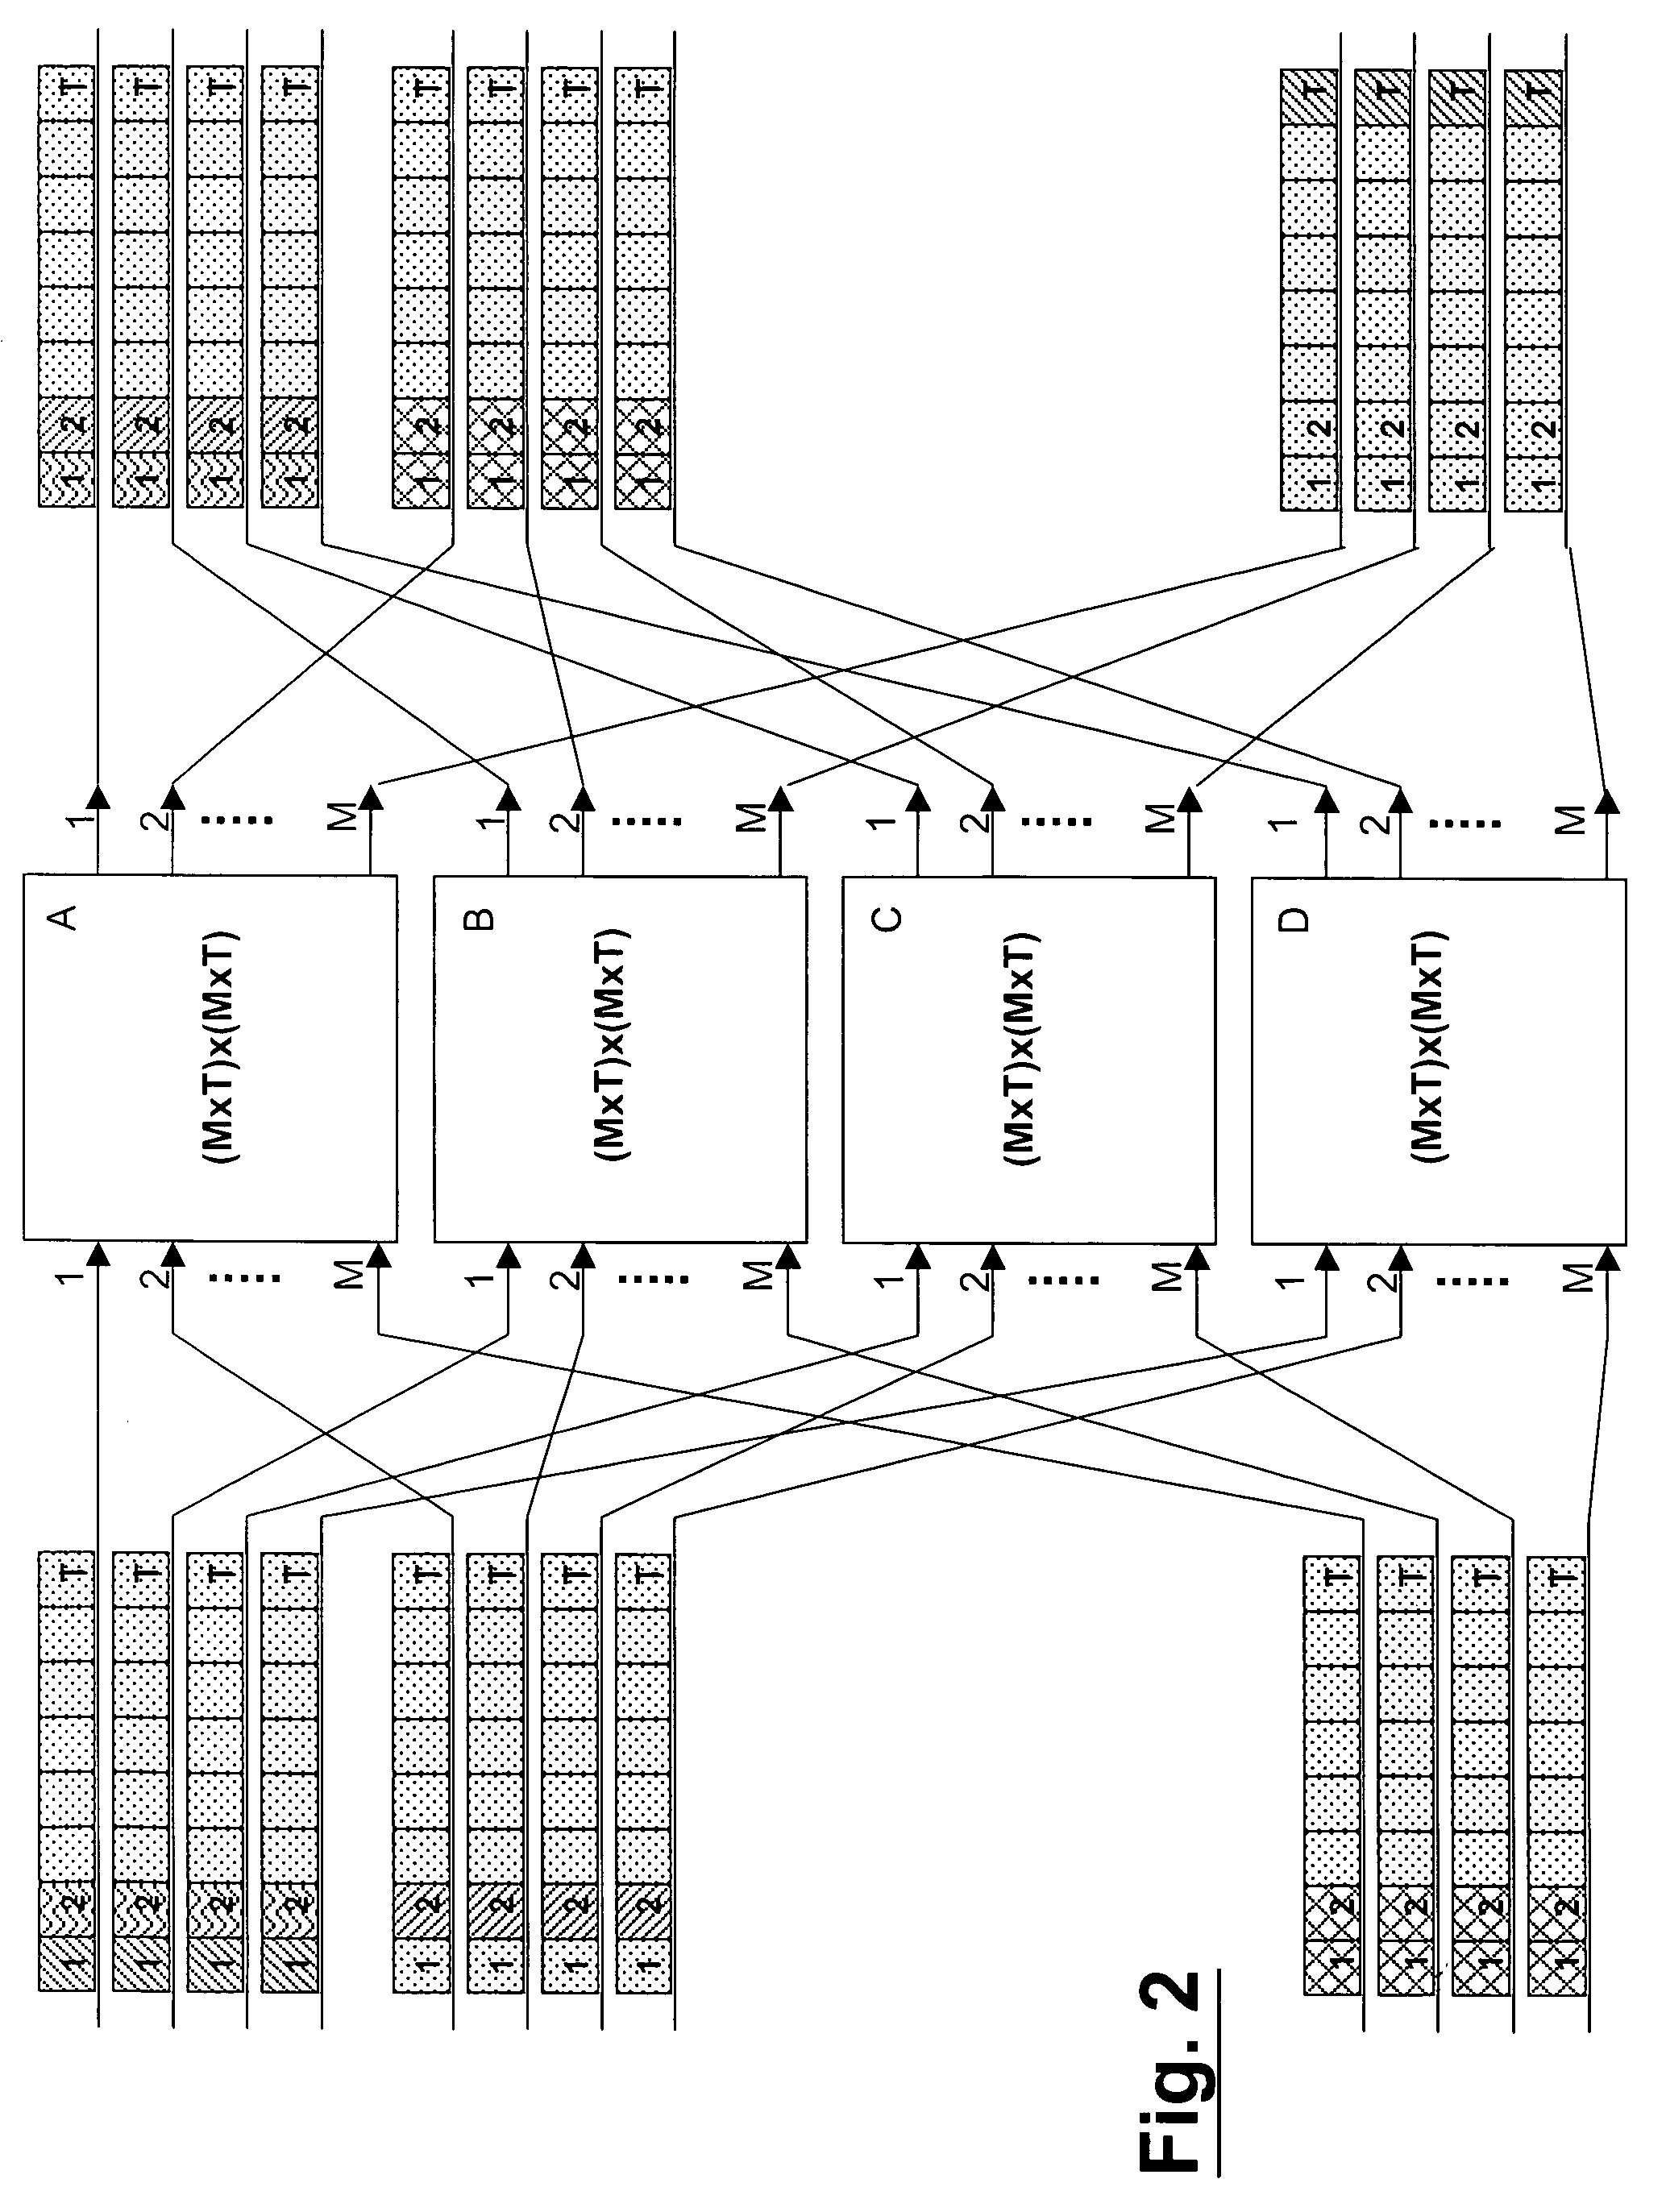 Time division multiplexed link connections between a switching matrix and a port in a network element